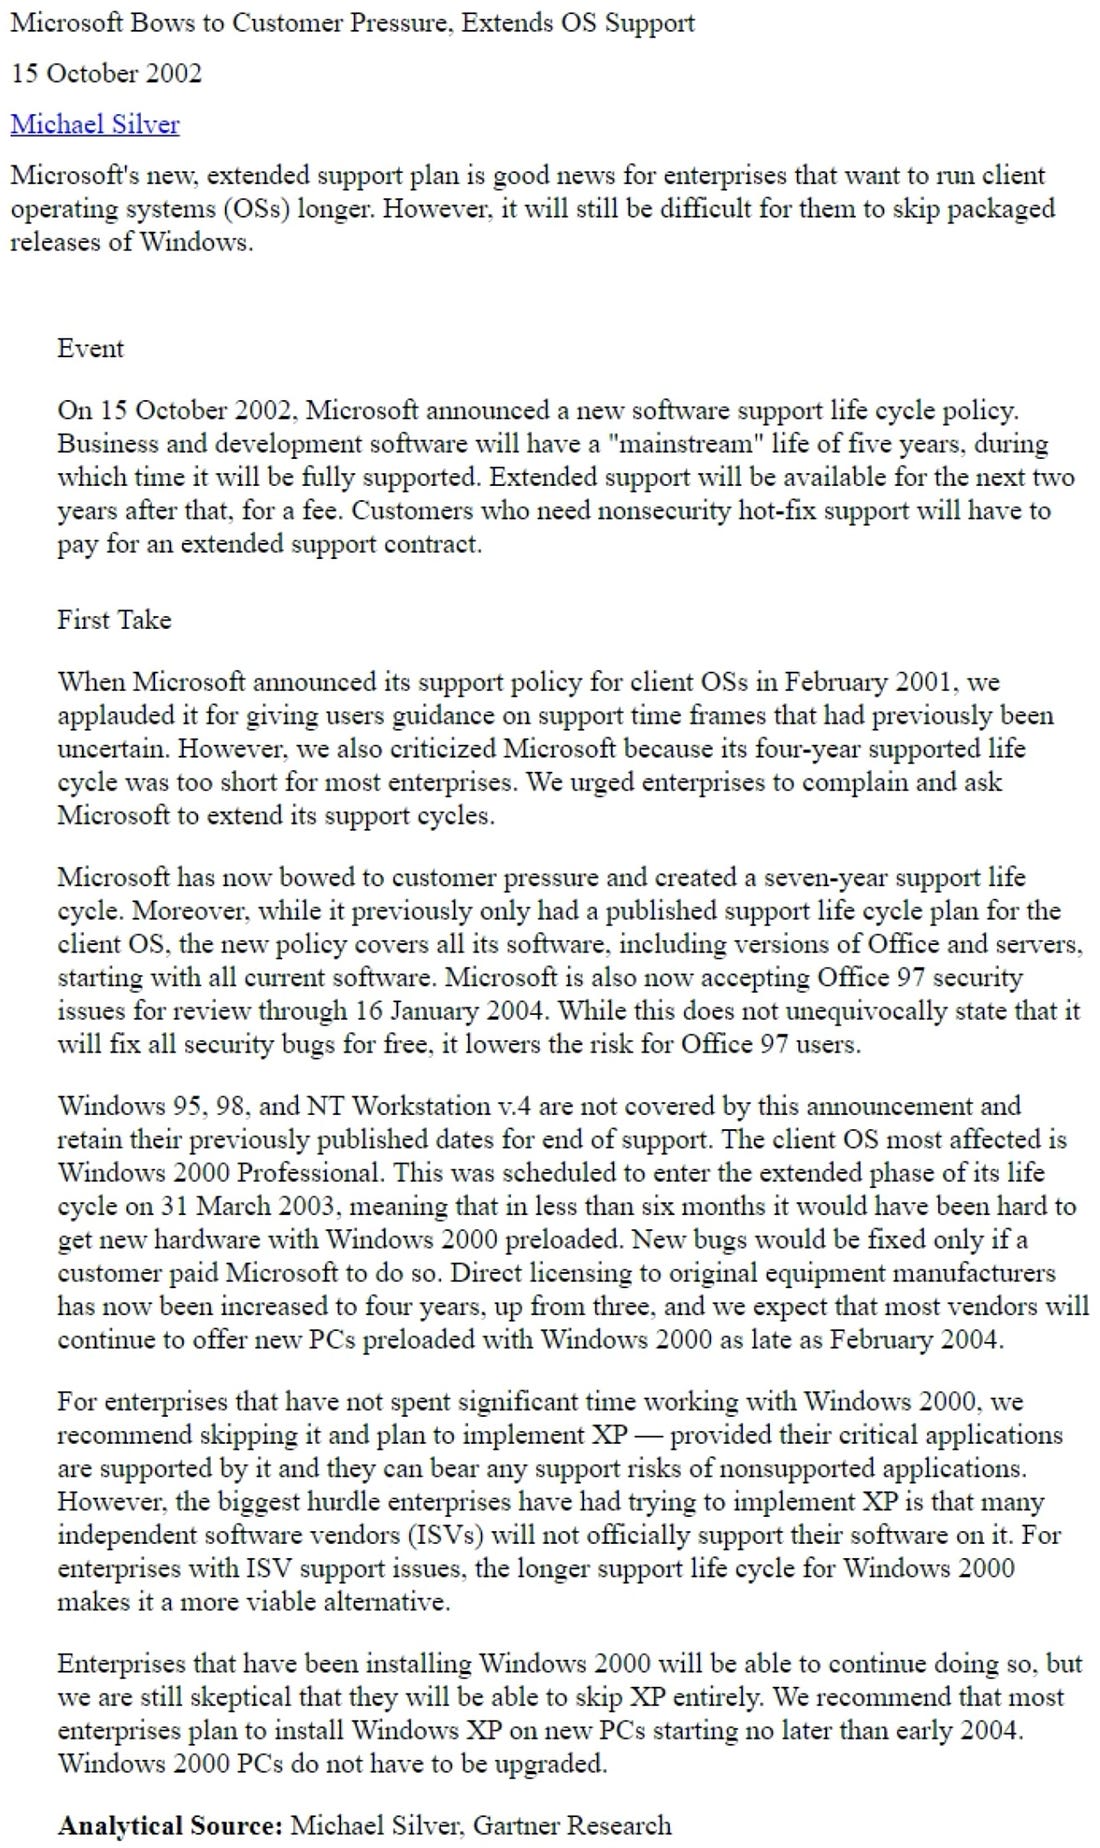 Microsoft Bows to Customer Pressure, Extends OS Support 15 October 2002 Michael Silver Microsoft's new, extended support plan is good news for enterprises that want to run client operating systems (OSs) longer. However, it will still be difficult for them to skip packaged releases of Windows. Event On 15 October 2002, Microsoft announced a new software support life cycle policy. Business and development software will have a "mainstream" life of five years, during which time it will be fully supported. Extended support will be available for the next two years after that, for a fee. Customers who need nonsecurity hot-fix support will have to pay for an extended support contract. First Take When Microsoft announced its support policy for client OSs in February 2001, we applauded it for giving users guidance on support time frames that had previously been uncertain. However. we also criticized Microsoft because its four-year supported life cycle was too short for most enterprises. We urged enterprises to complain and ask Microsoft to extend its support cycles. Microsoft has now bowed to customer pressure and created a seven-year support life cycle. Moreover, while it previously only had a published support life cycle plan for the client OS, the new policy covers all its software, including versions of Office and servers, starting with all current software. Microsoft is also now accepting Office 97 security issues for review through 16 January 2004. While this does not unequivocally state that it will fix all security bugs for free, it lowers the risk for Office 97 users. Windows 95, 98, and NT Workstation v.4 are not covered by this announcement and retain their previously published dates for end of support. The client OS most affected is Windows 2000 Professional. This was scheduled to enter the extended phase of its life cycle on 31 March 2003, meaning that in less than six months it would have been hard to get new hardware with Windows 2000 preloaded. New bugs would be fixed only if a customer paid Microsoft to do so. Direct licensing to original equipment manufacturers has now been increased to four years, up from three, and we expect that most vendors will continue to offer new PCs preloaded with Windows 2000 as late as February 2004. For enterprises that have not spent significant time working with Windows 2000, we recommend skipping it and plan to implement XP - provided their critical applications are supported by it and they can bear any support risks of nonsupported applications However, the biggest hurdle enterprises have had trying to implement XP is that many independent software vendors (ISVs) will not officially support their software on it. For enterprises with ISV support issues, the longer support life cycle for Windows 2000 makes it a more viable alternative. Enterprises that have been installing Windows 2000 will be able to continue doing so, but we are still skeptical that they will be able to skip XP entirely. We recommend that most enterprises plan to install Windows XP on new PCs starting no later than early 2004. Windows 2000 PCs do not have to be upgraded.